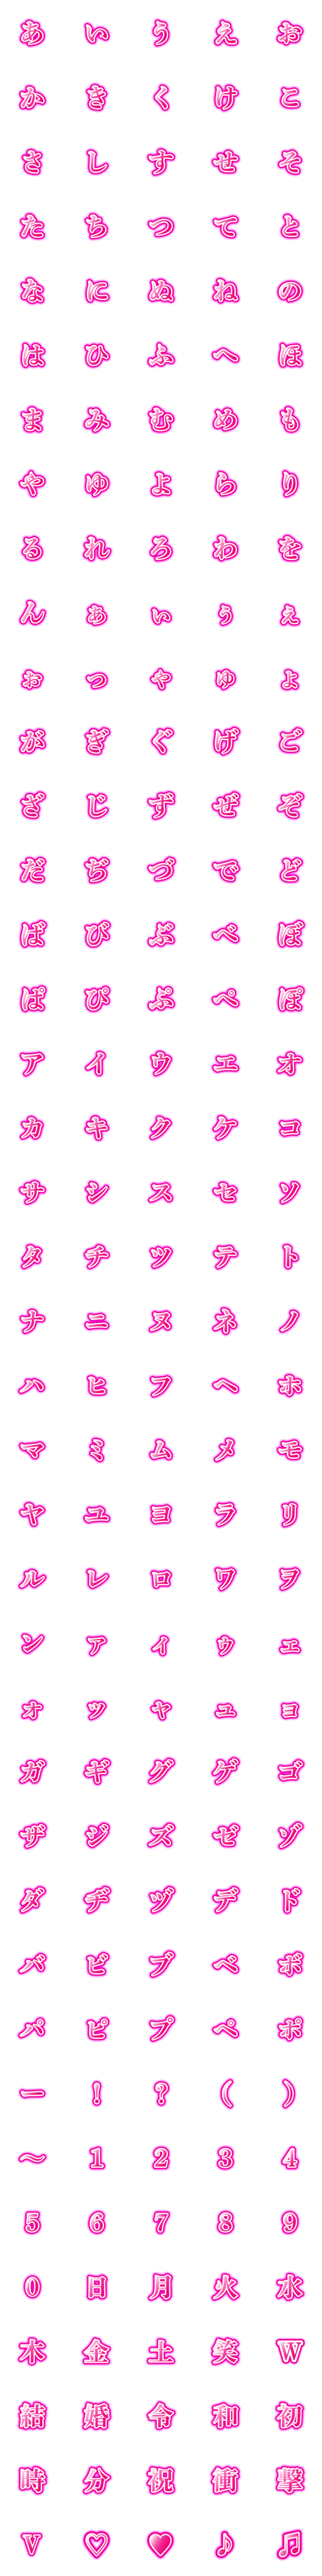 [LINE絵文字]ピンクのフォント♫の画像一覧